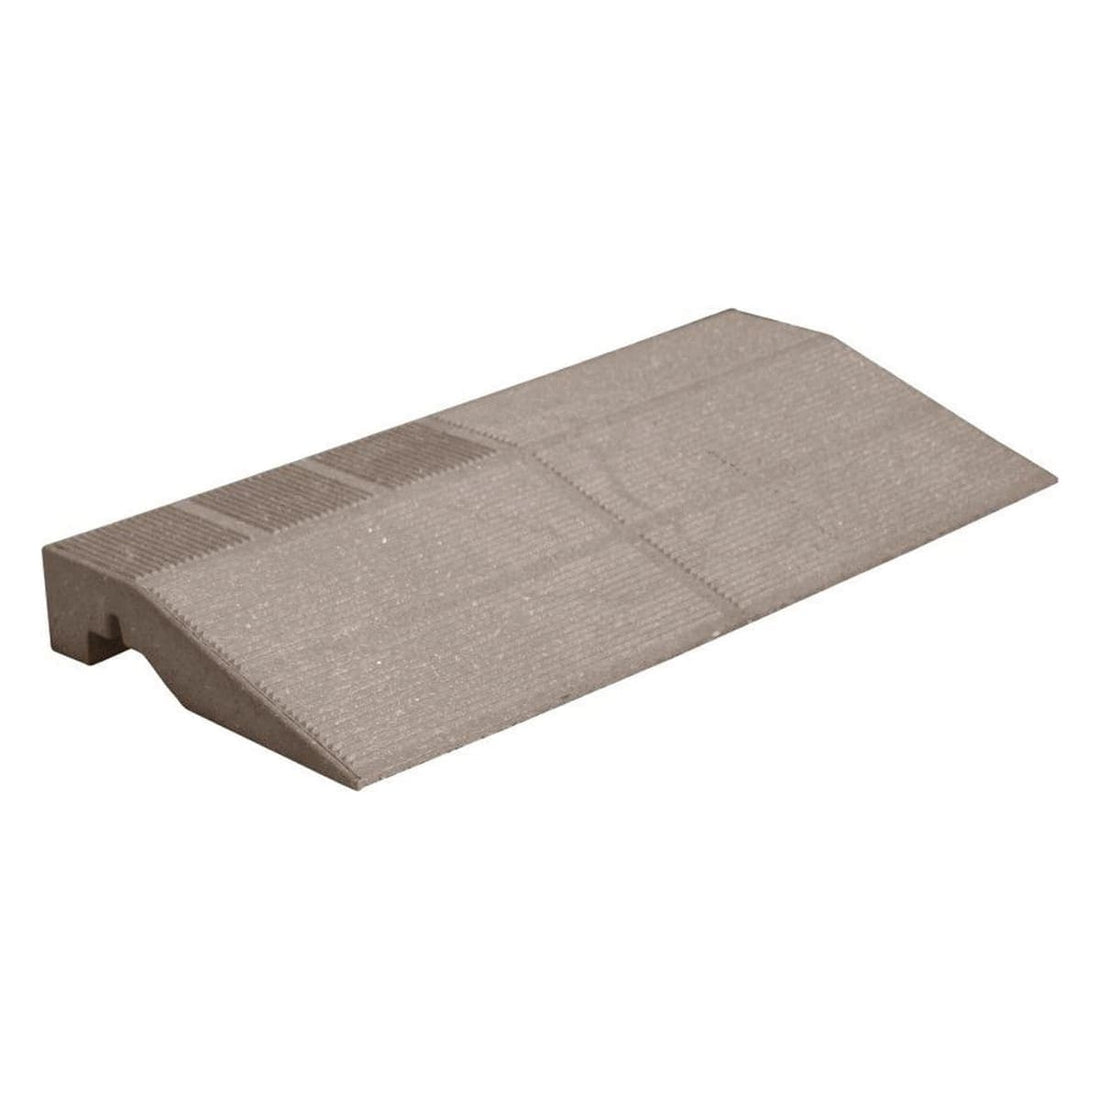 SLIDE WITH TONGUE AND GROOVE CONNECTION FOR WOOD COMPOSITE TILE LEPLA BROWN